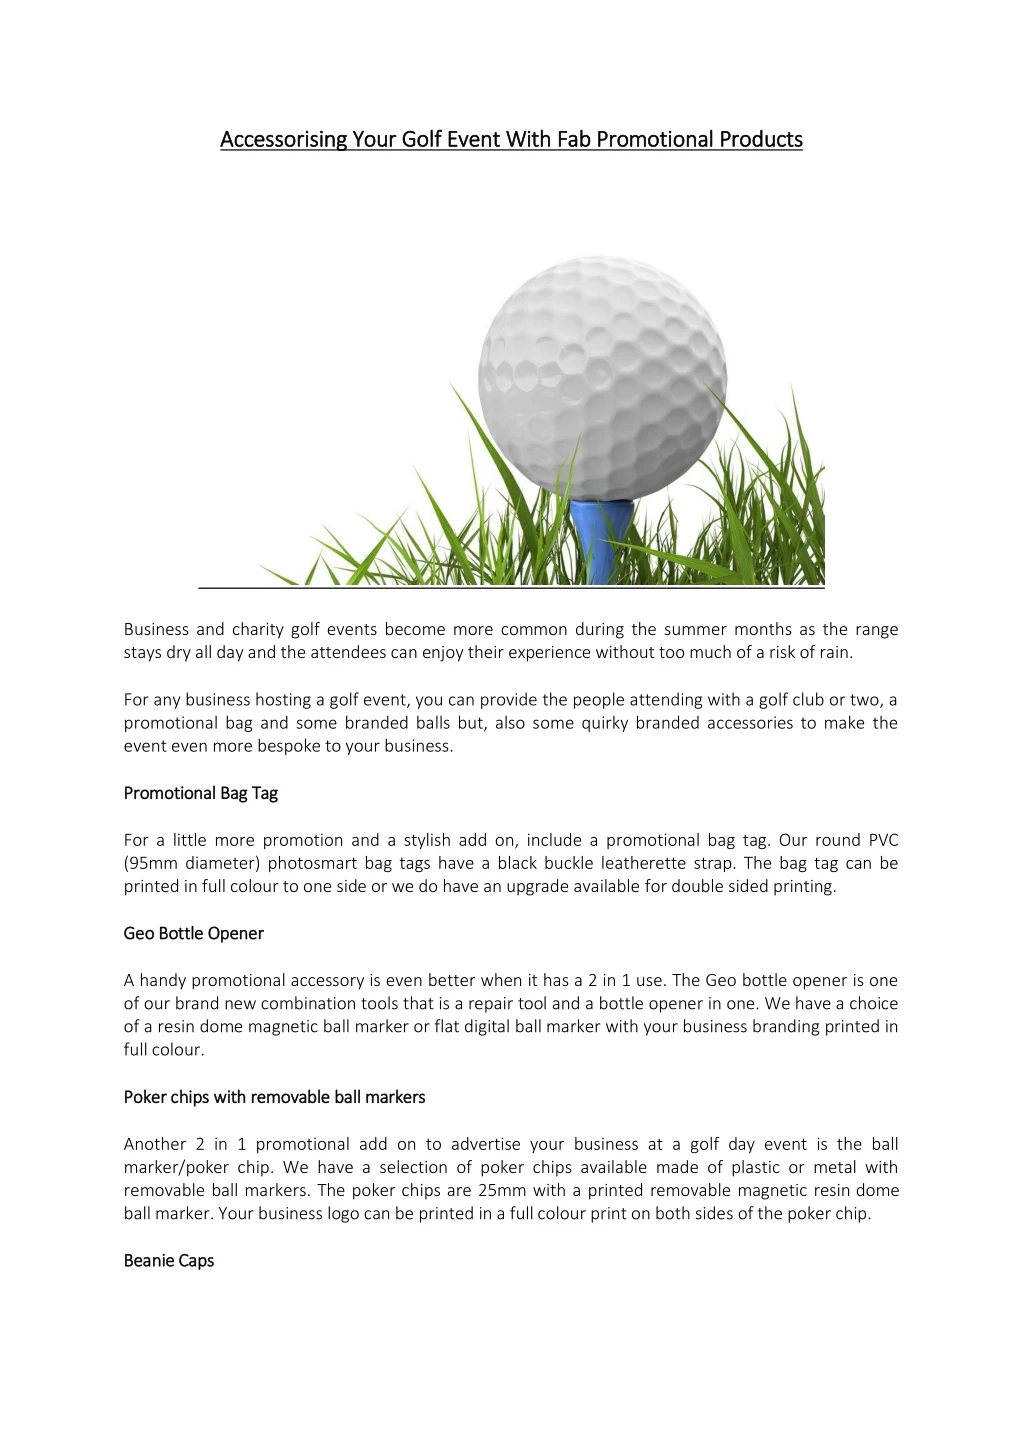 accessorising accessorising your golf event with